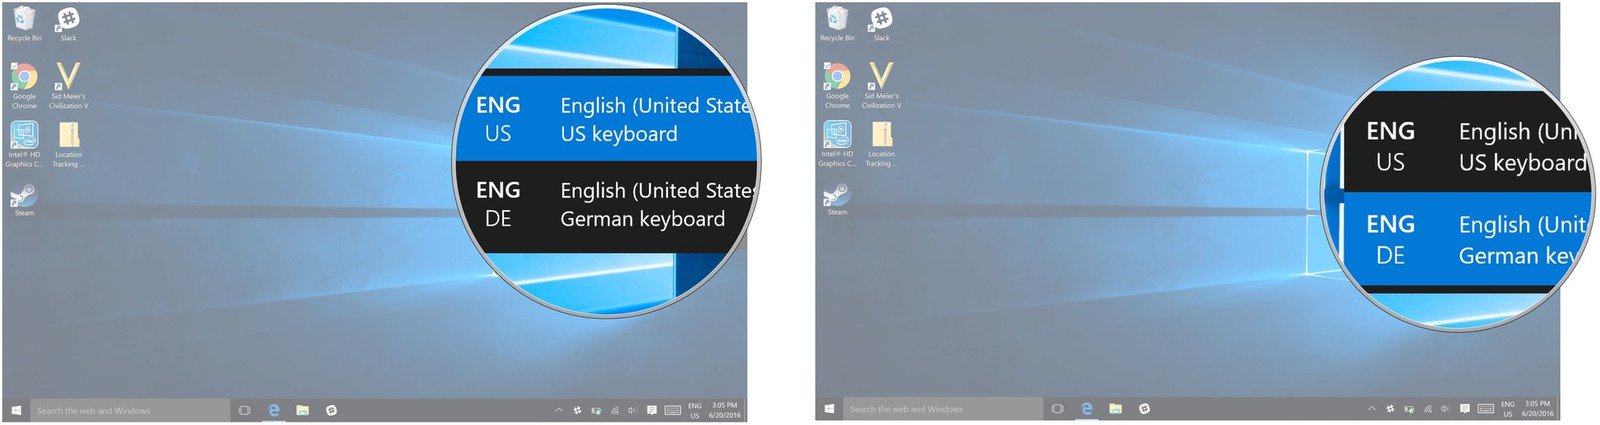 How to print image larger and adjust layout? Windows 10 windows-10-chnage-keyboard-layout-screens-05.jpg